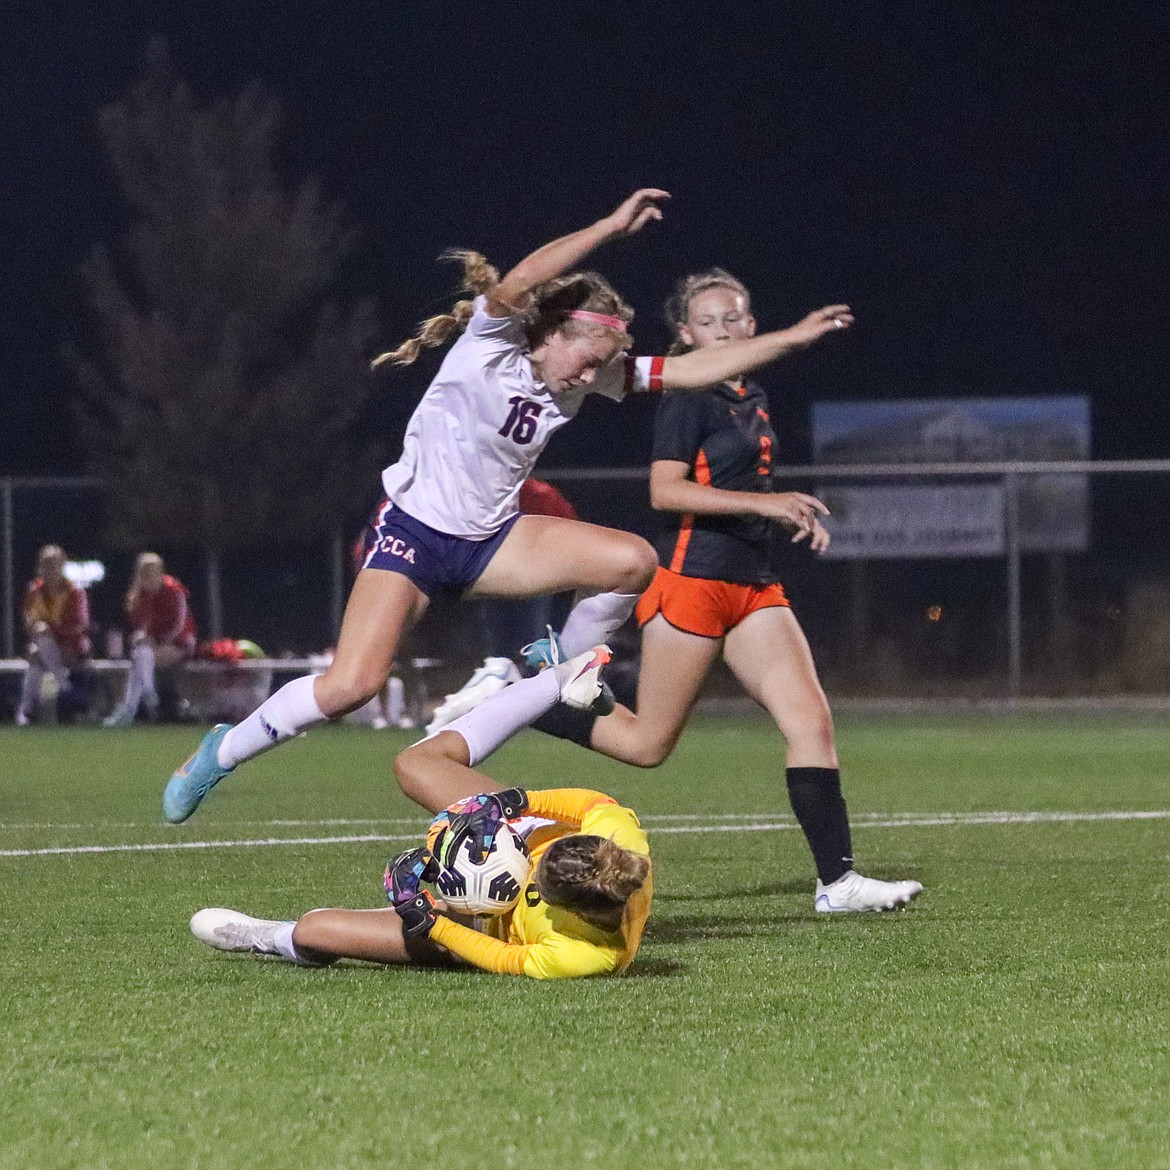 Photo by JERRY VICK
Rebekah Hines (16) of Coeur d'Alene Charter Academy leaps over Post Falls goalkeeper Rose McGowan on Saturday night at The Fields at Real Life Ministries in Post Falls.